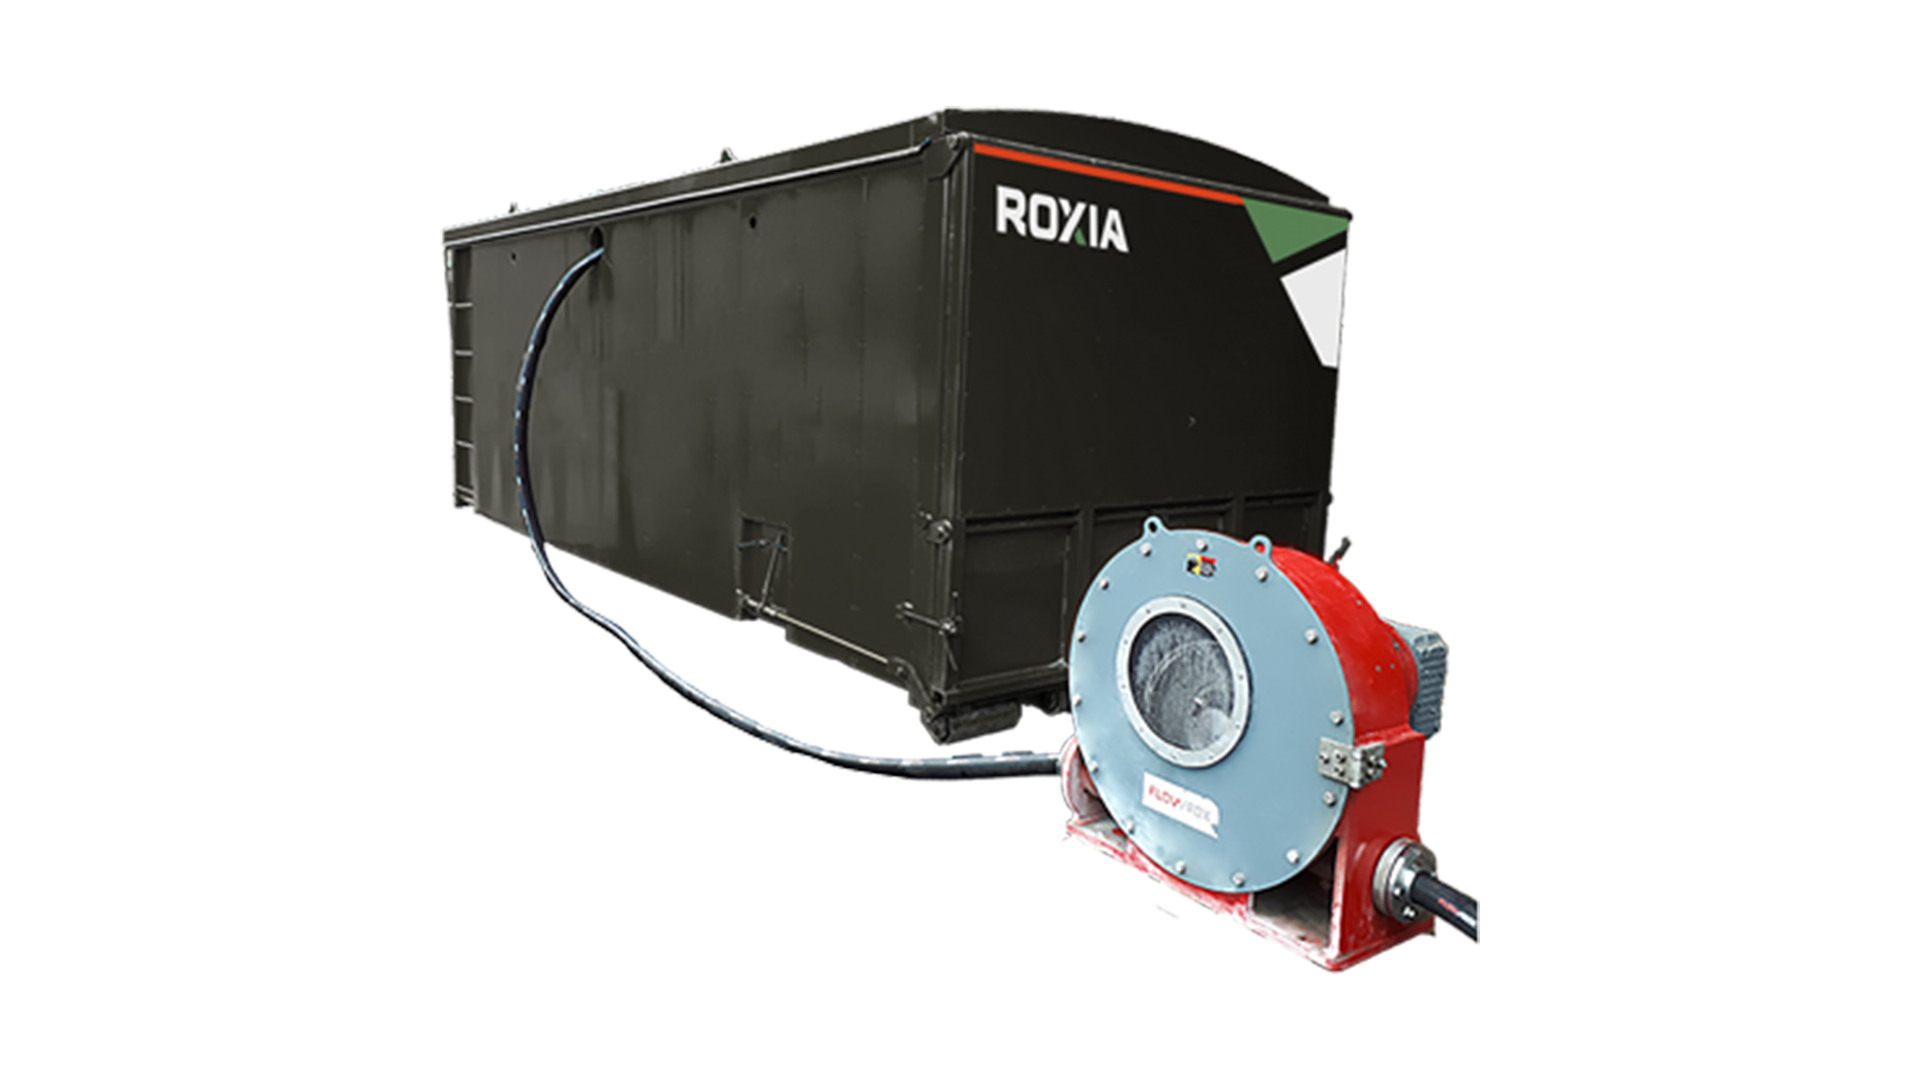 Roxia Dewatering Unit. Sludge dewatering, solids collection in a geotextile bag, roll-off container for transportation.